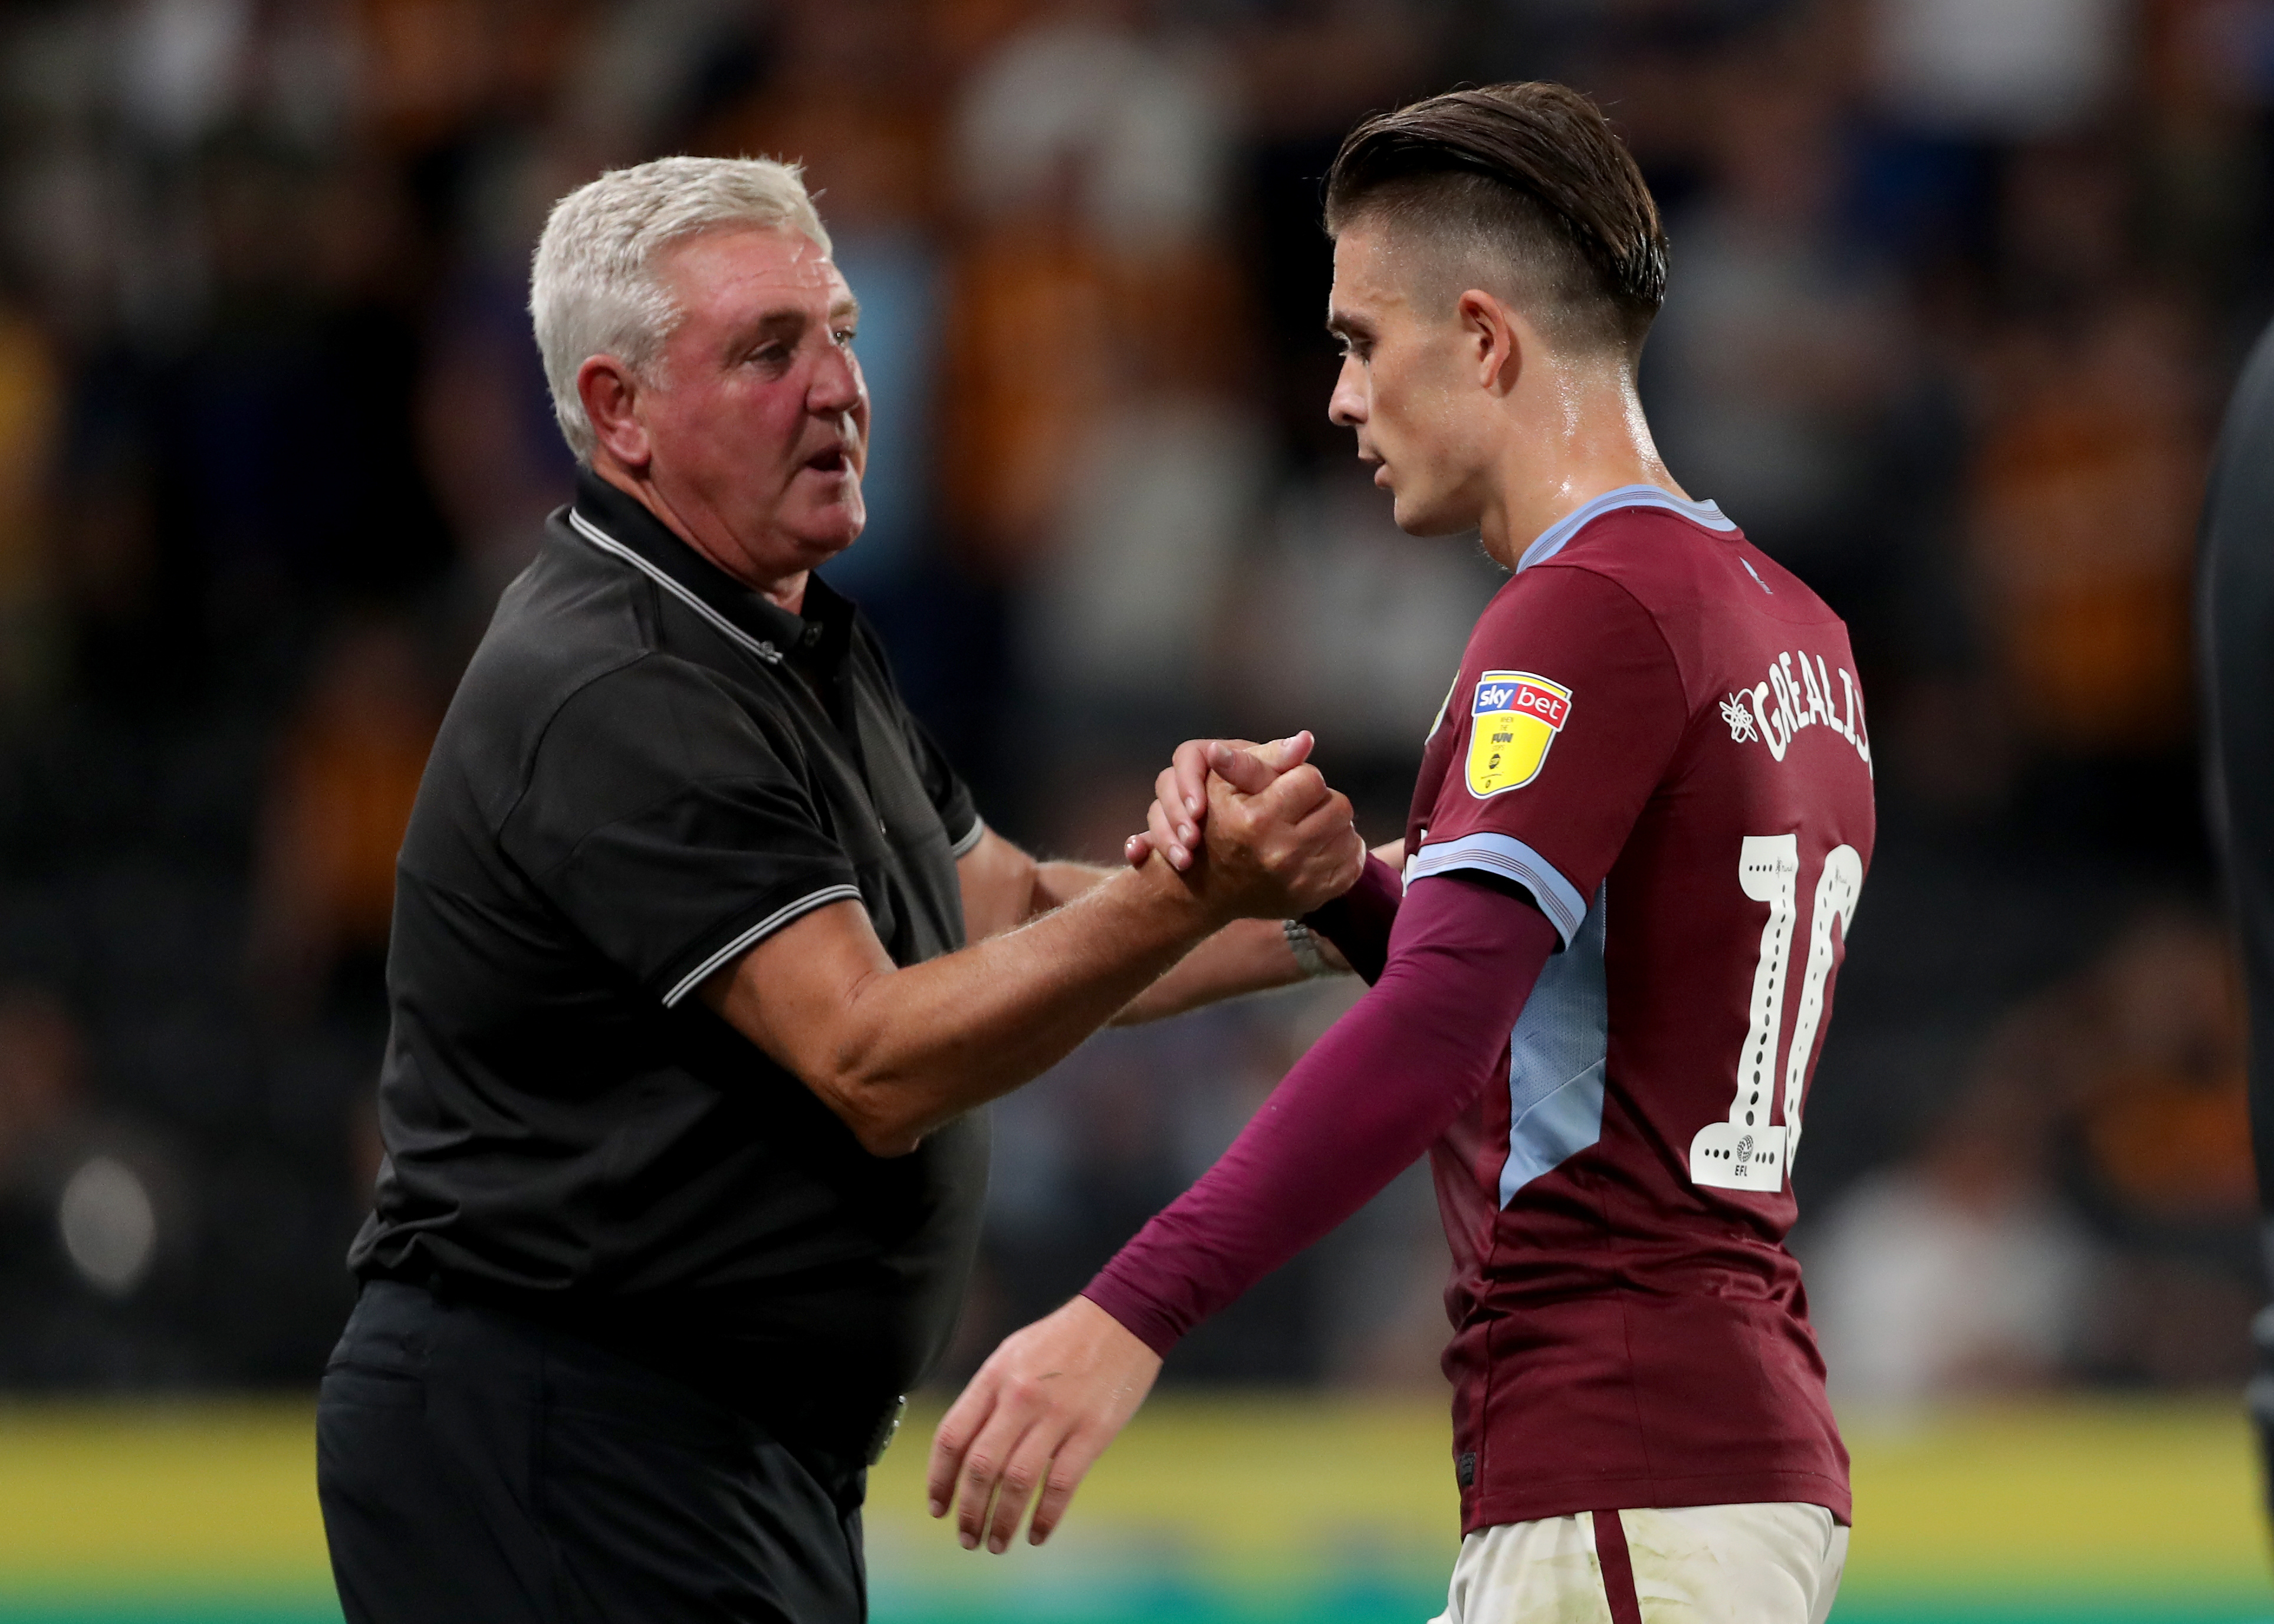 Grealish was a key player for Aston Villa under the leadership of Steve Bruce